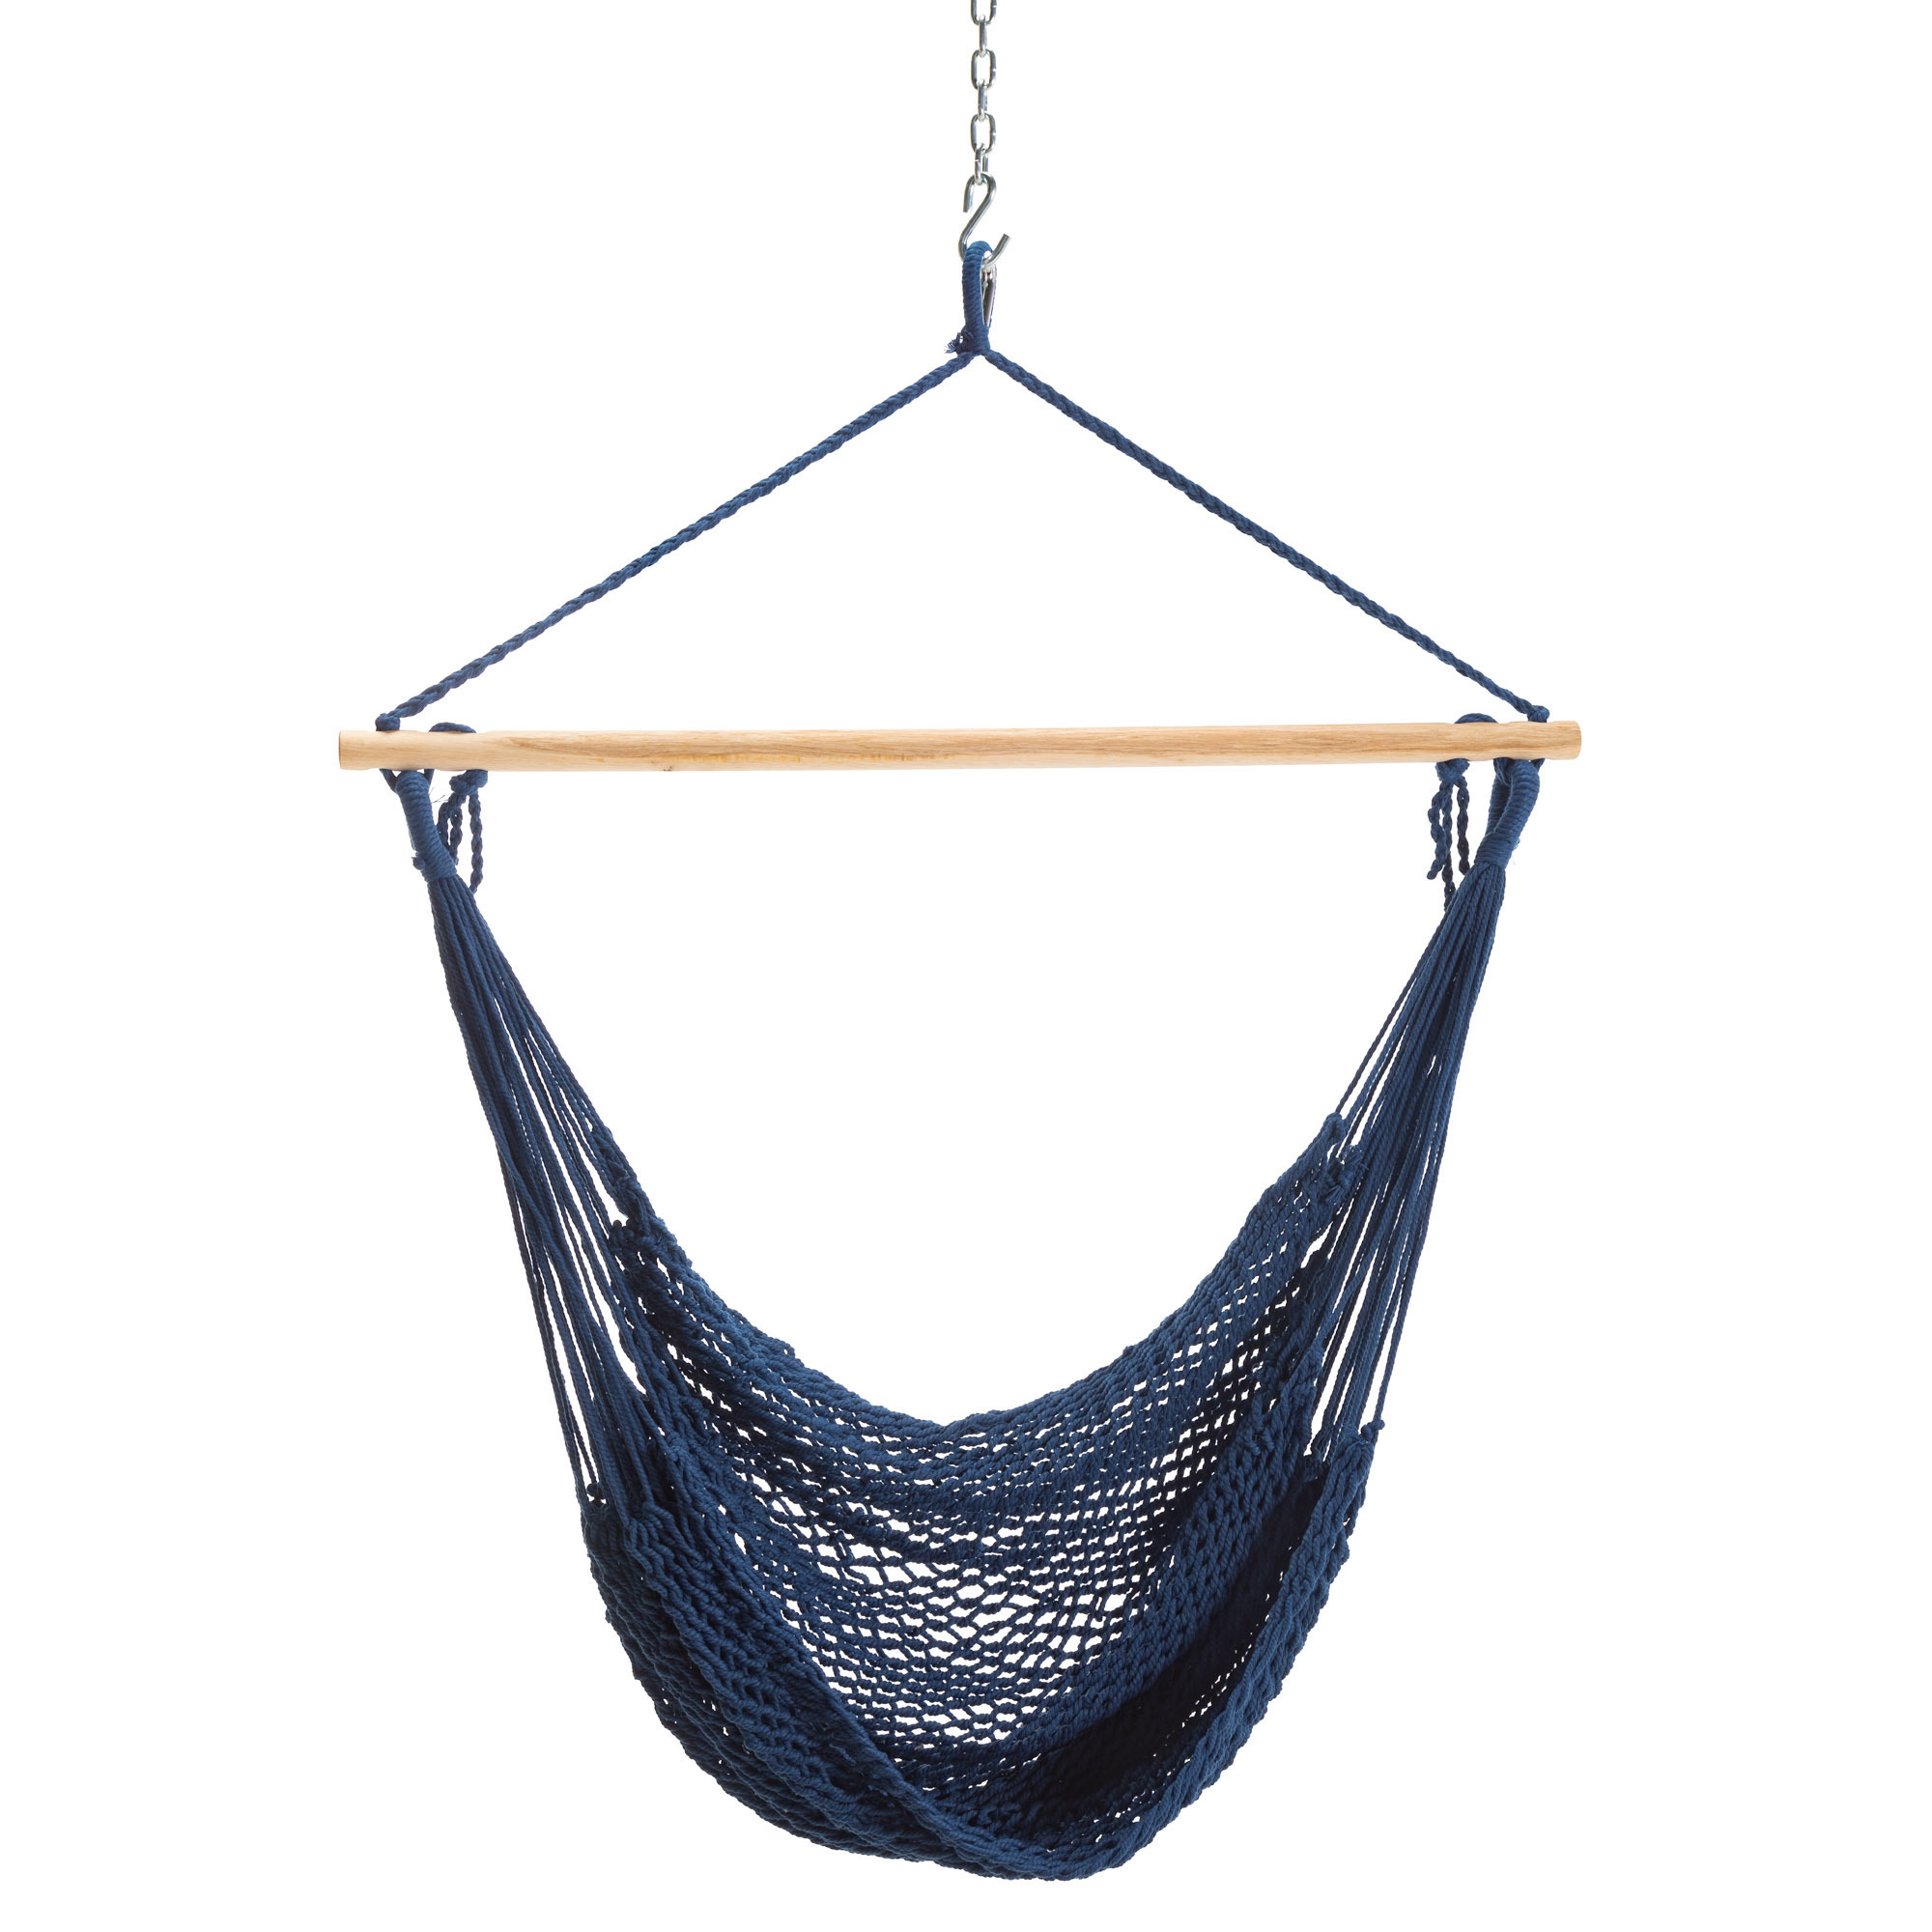 Castaway Living, Single Polyester Rope Swing - Navy, Color Navy, Capacity 250 lb, Material Polyester, Model 311NV